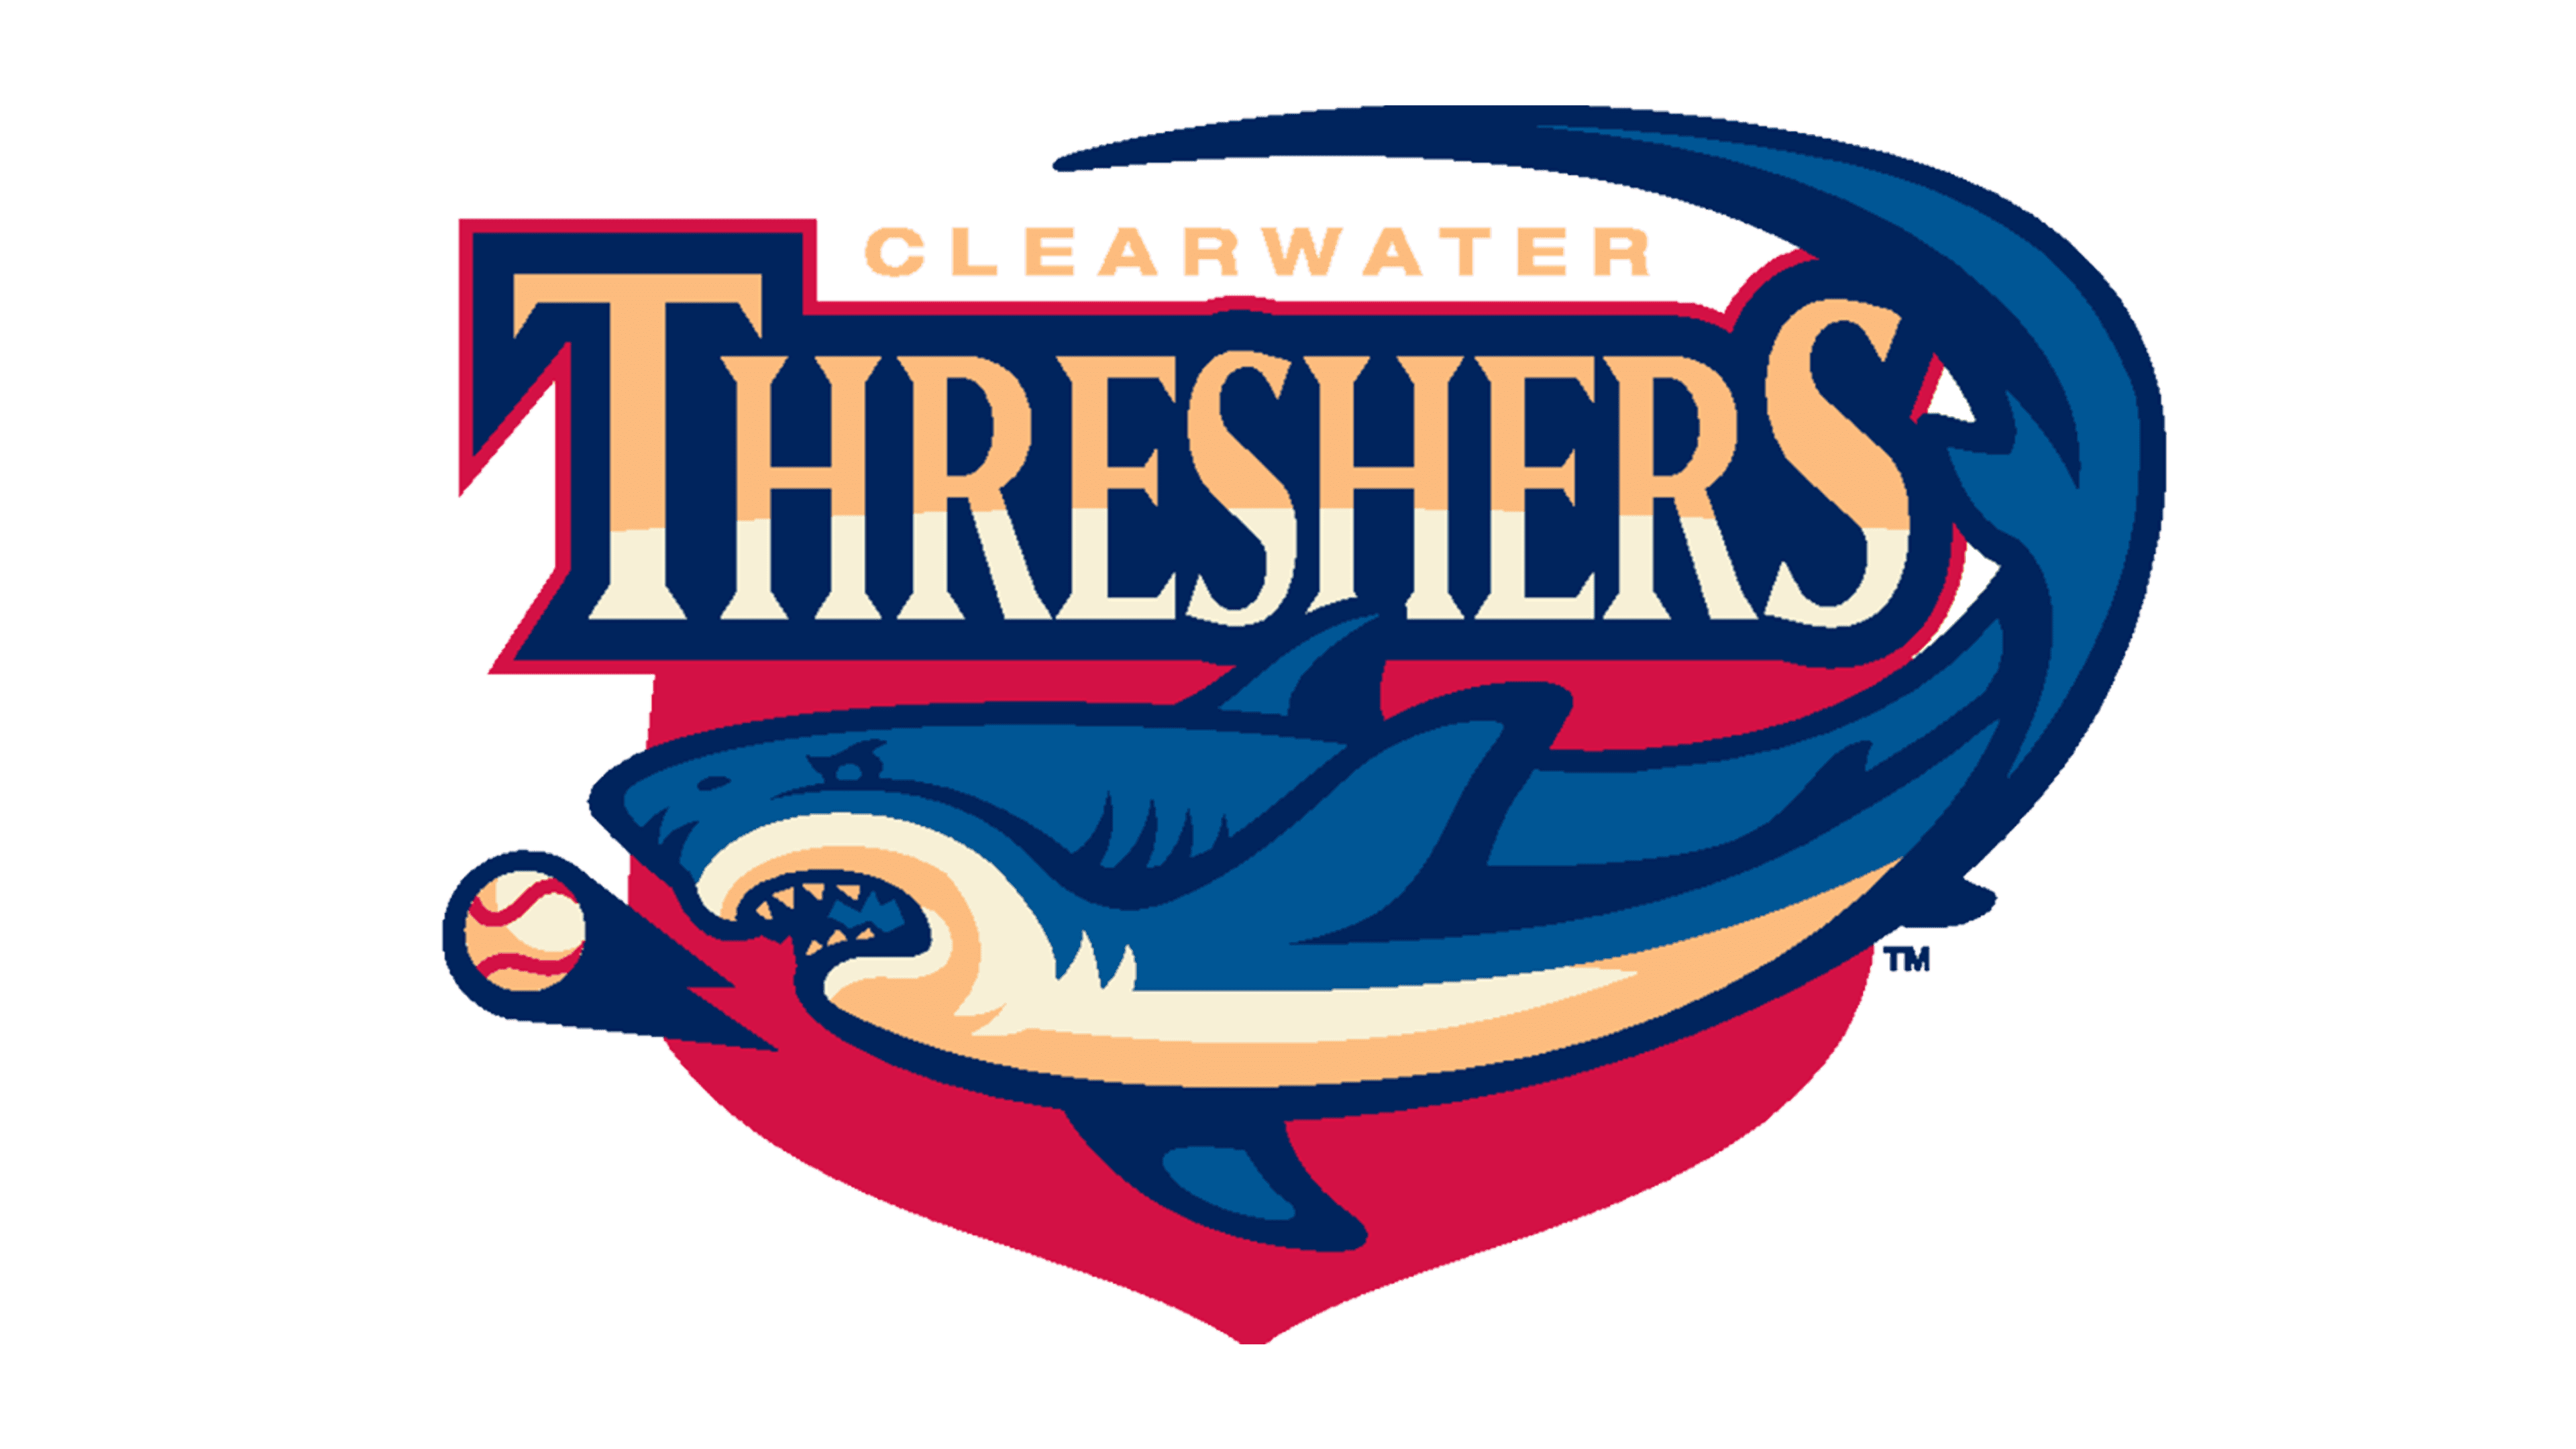 Clearwater Threshers PNG HD